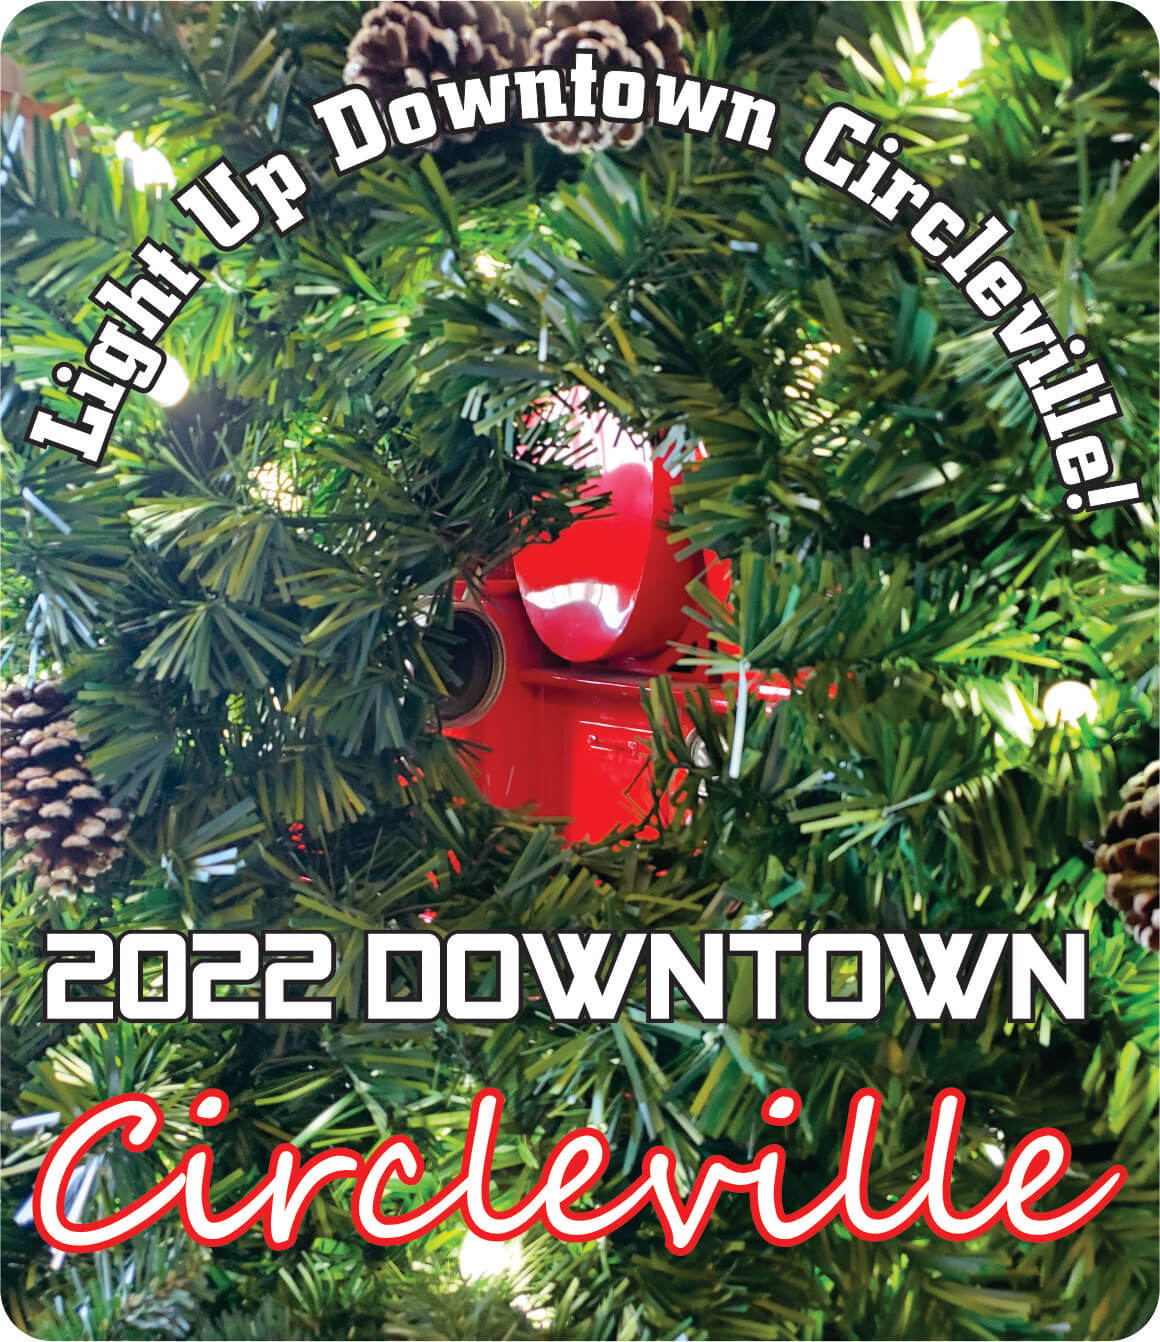 Light up downtown Circleville, Ohio 2022